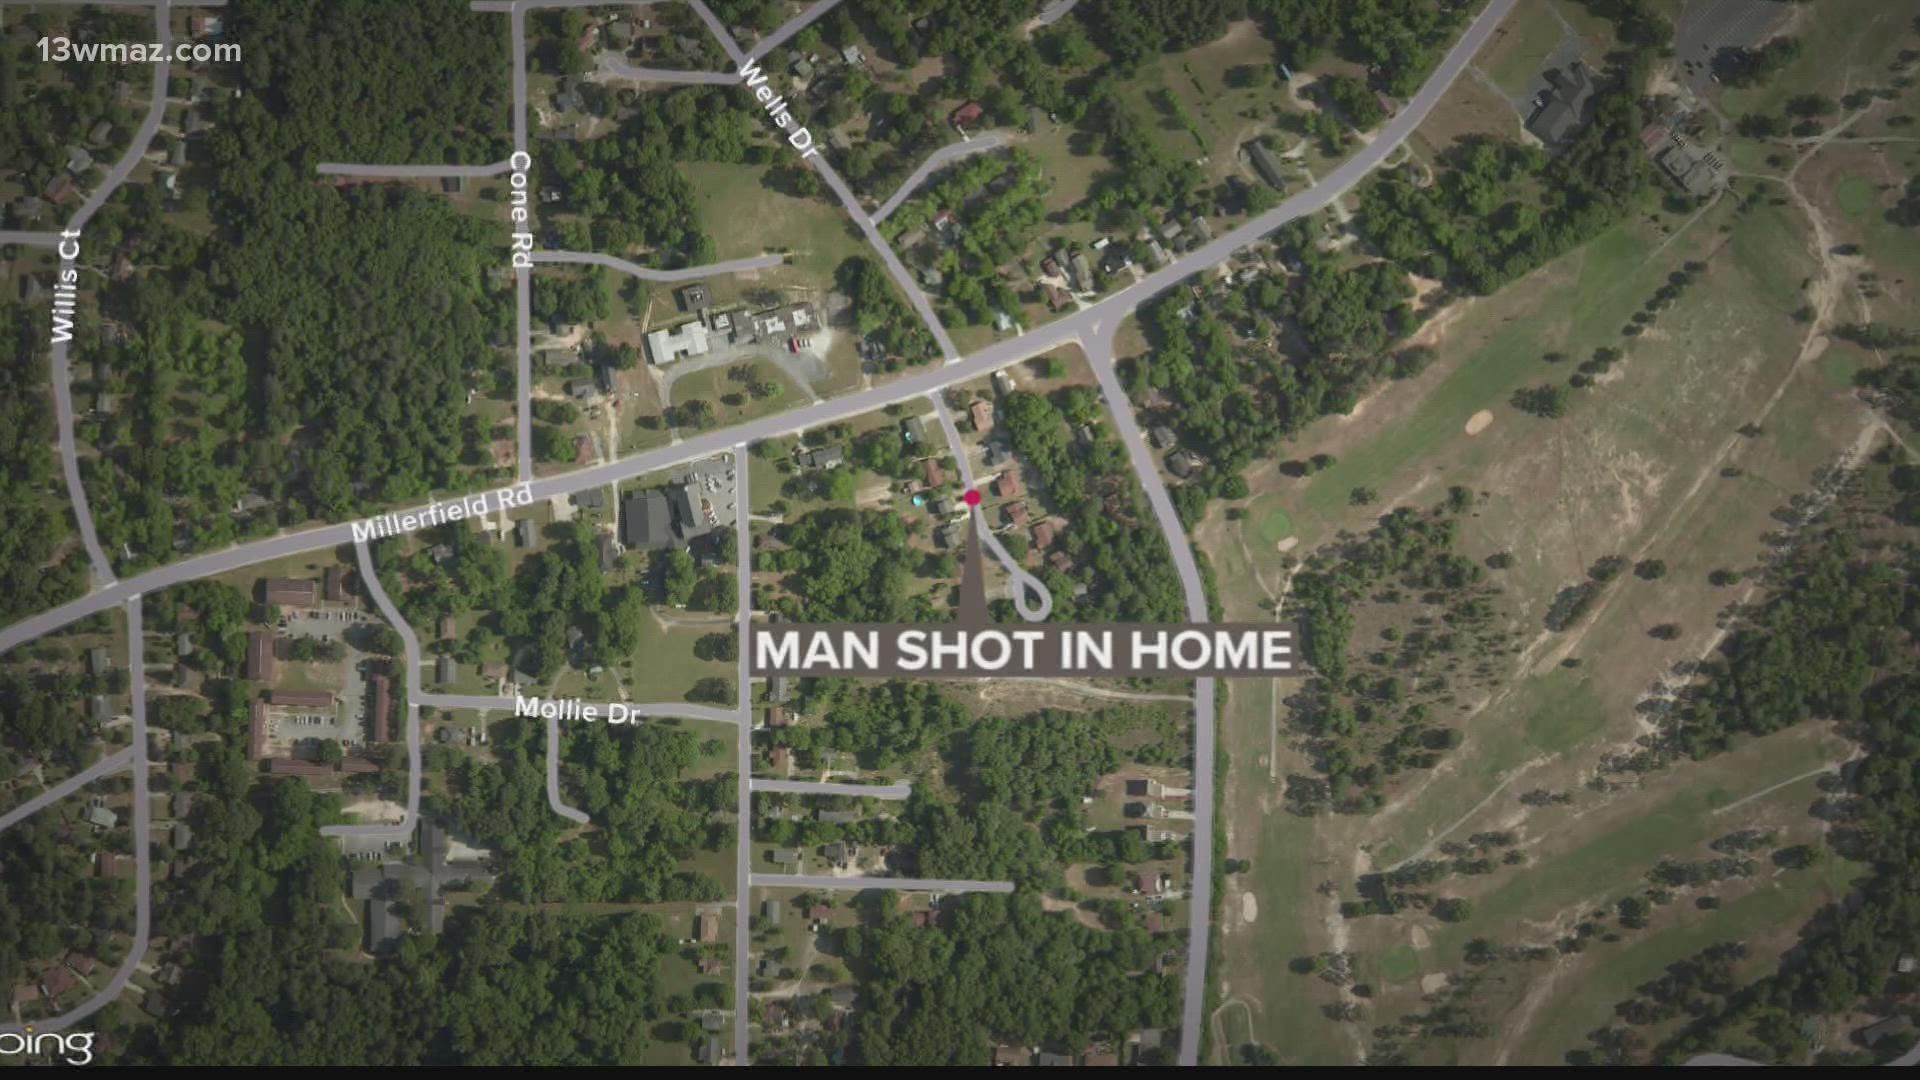 A 70-year-old man shot earlier this week at his east Macon home has died.